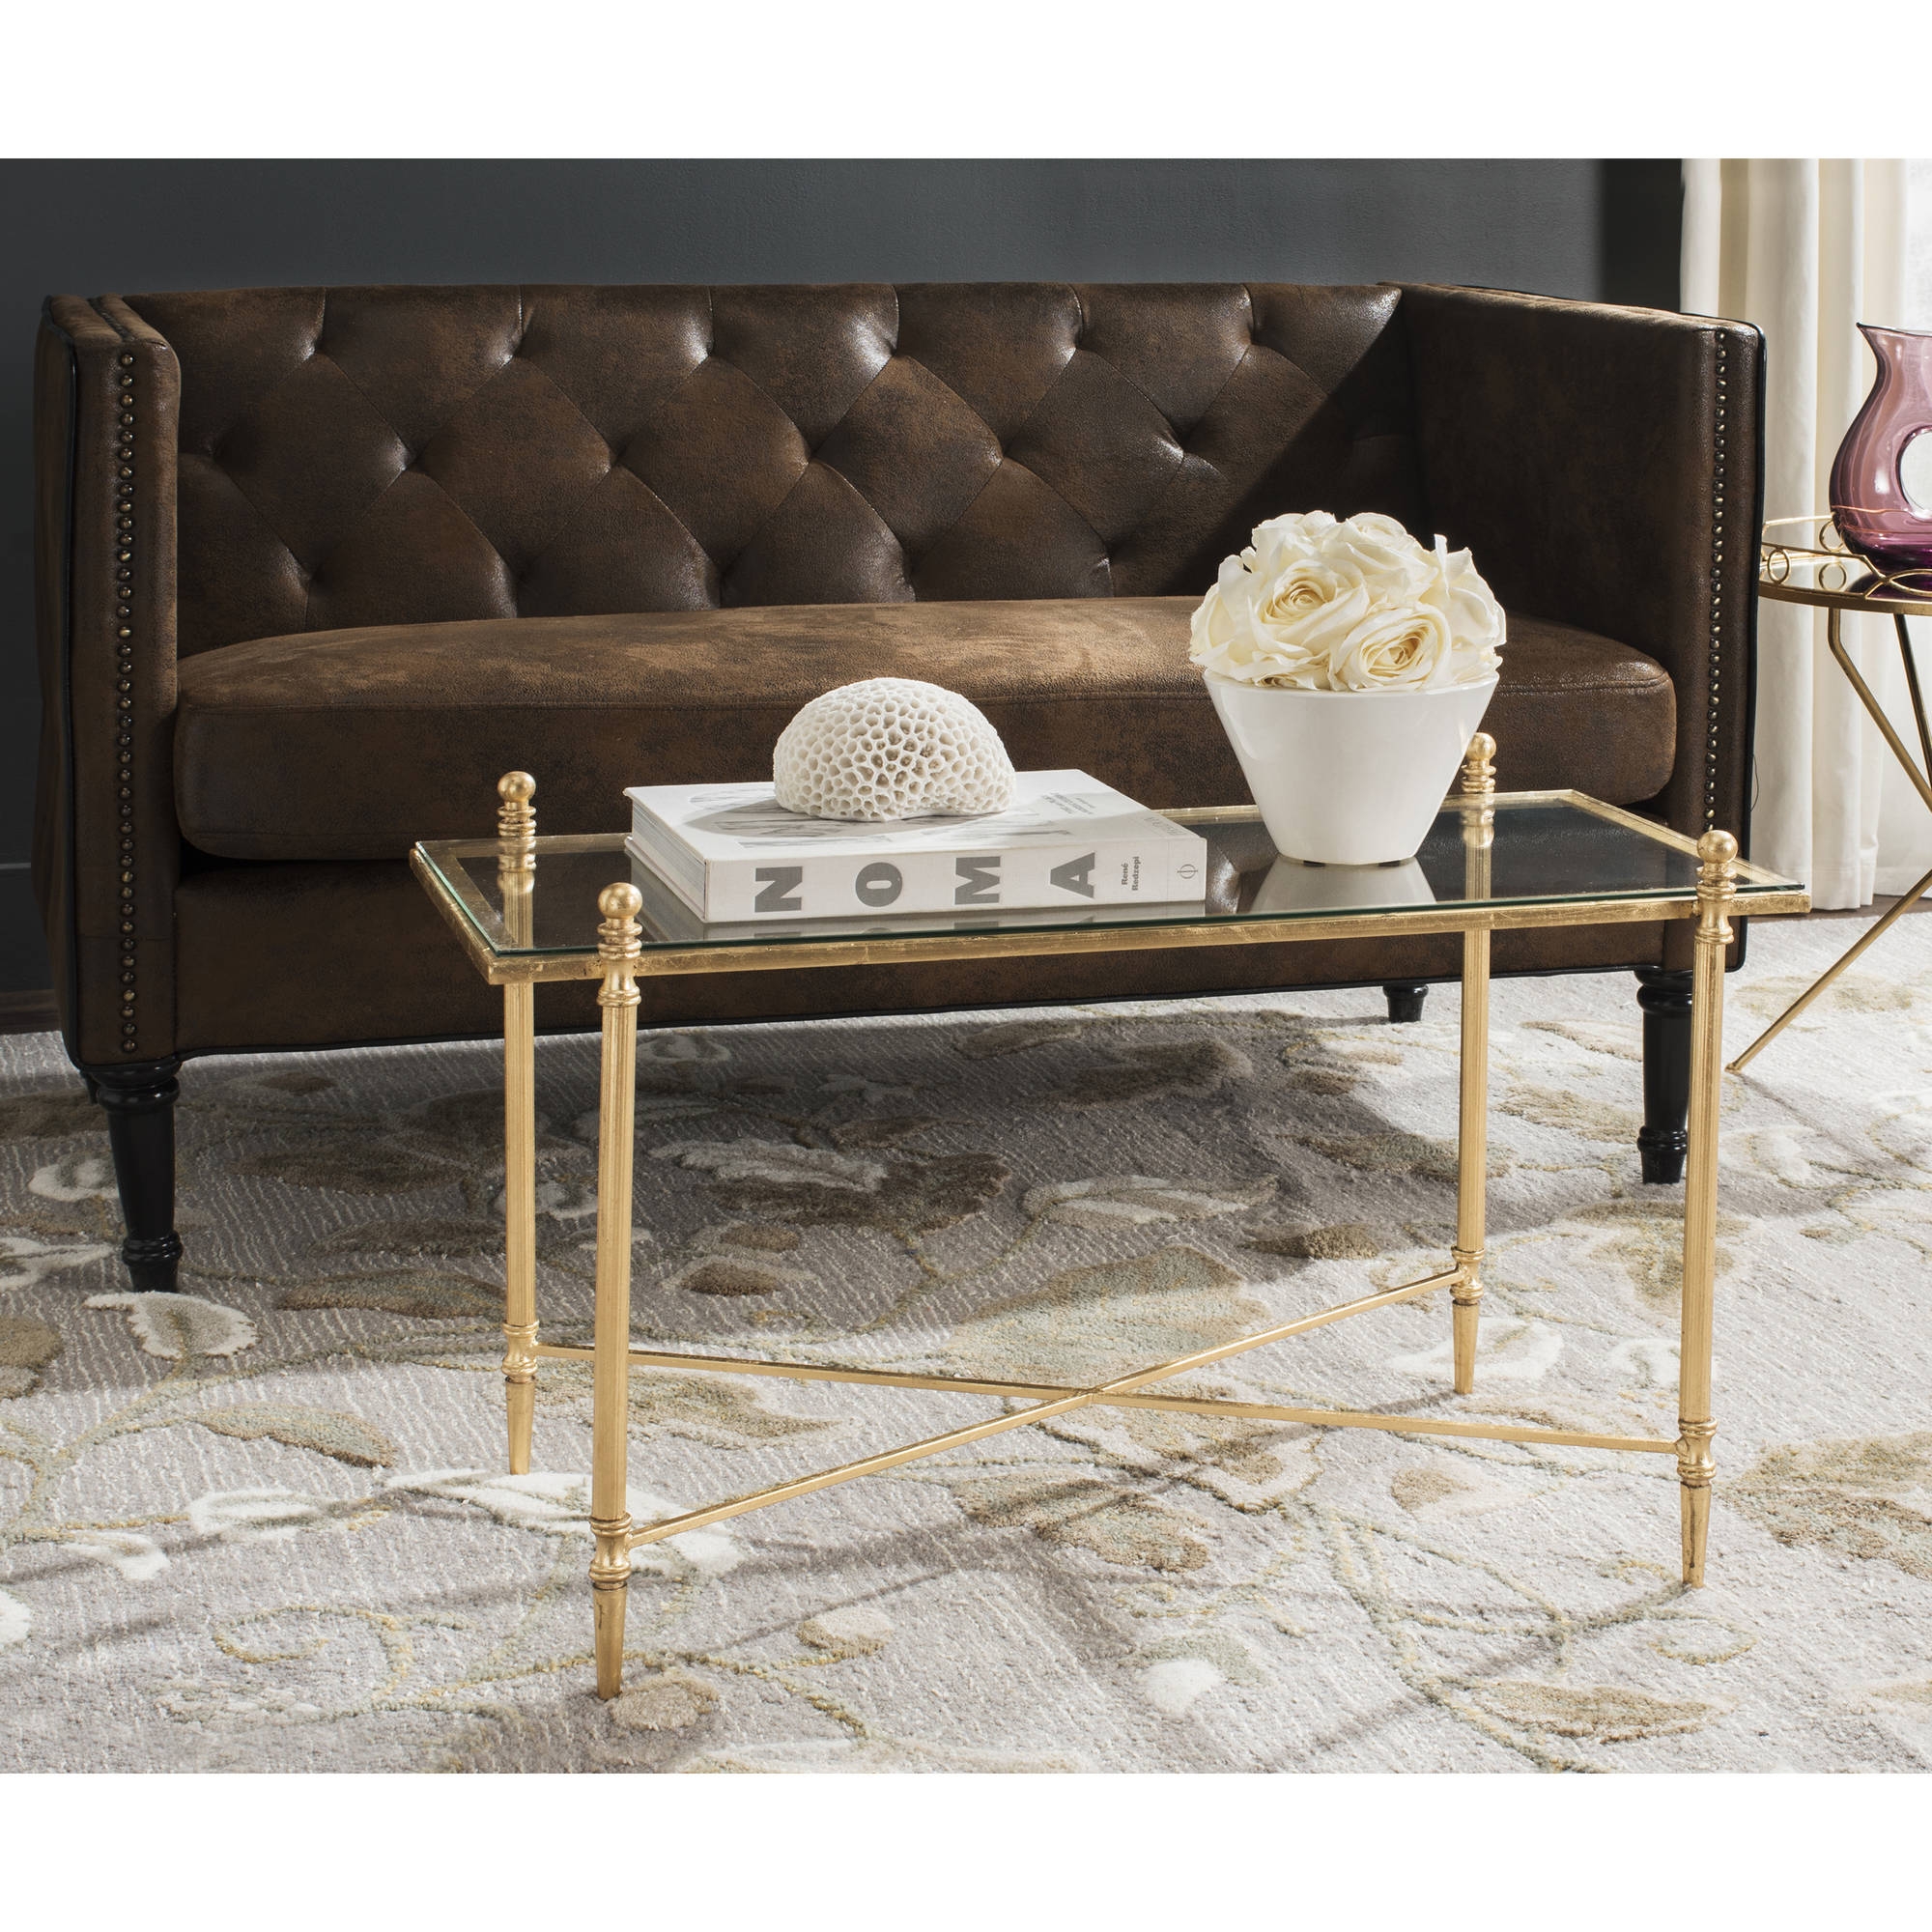 Tait Coffee Table - Antique Gold - Arlo Home - Image 2